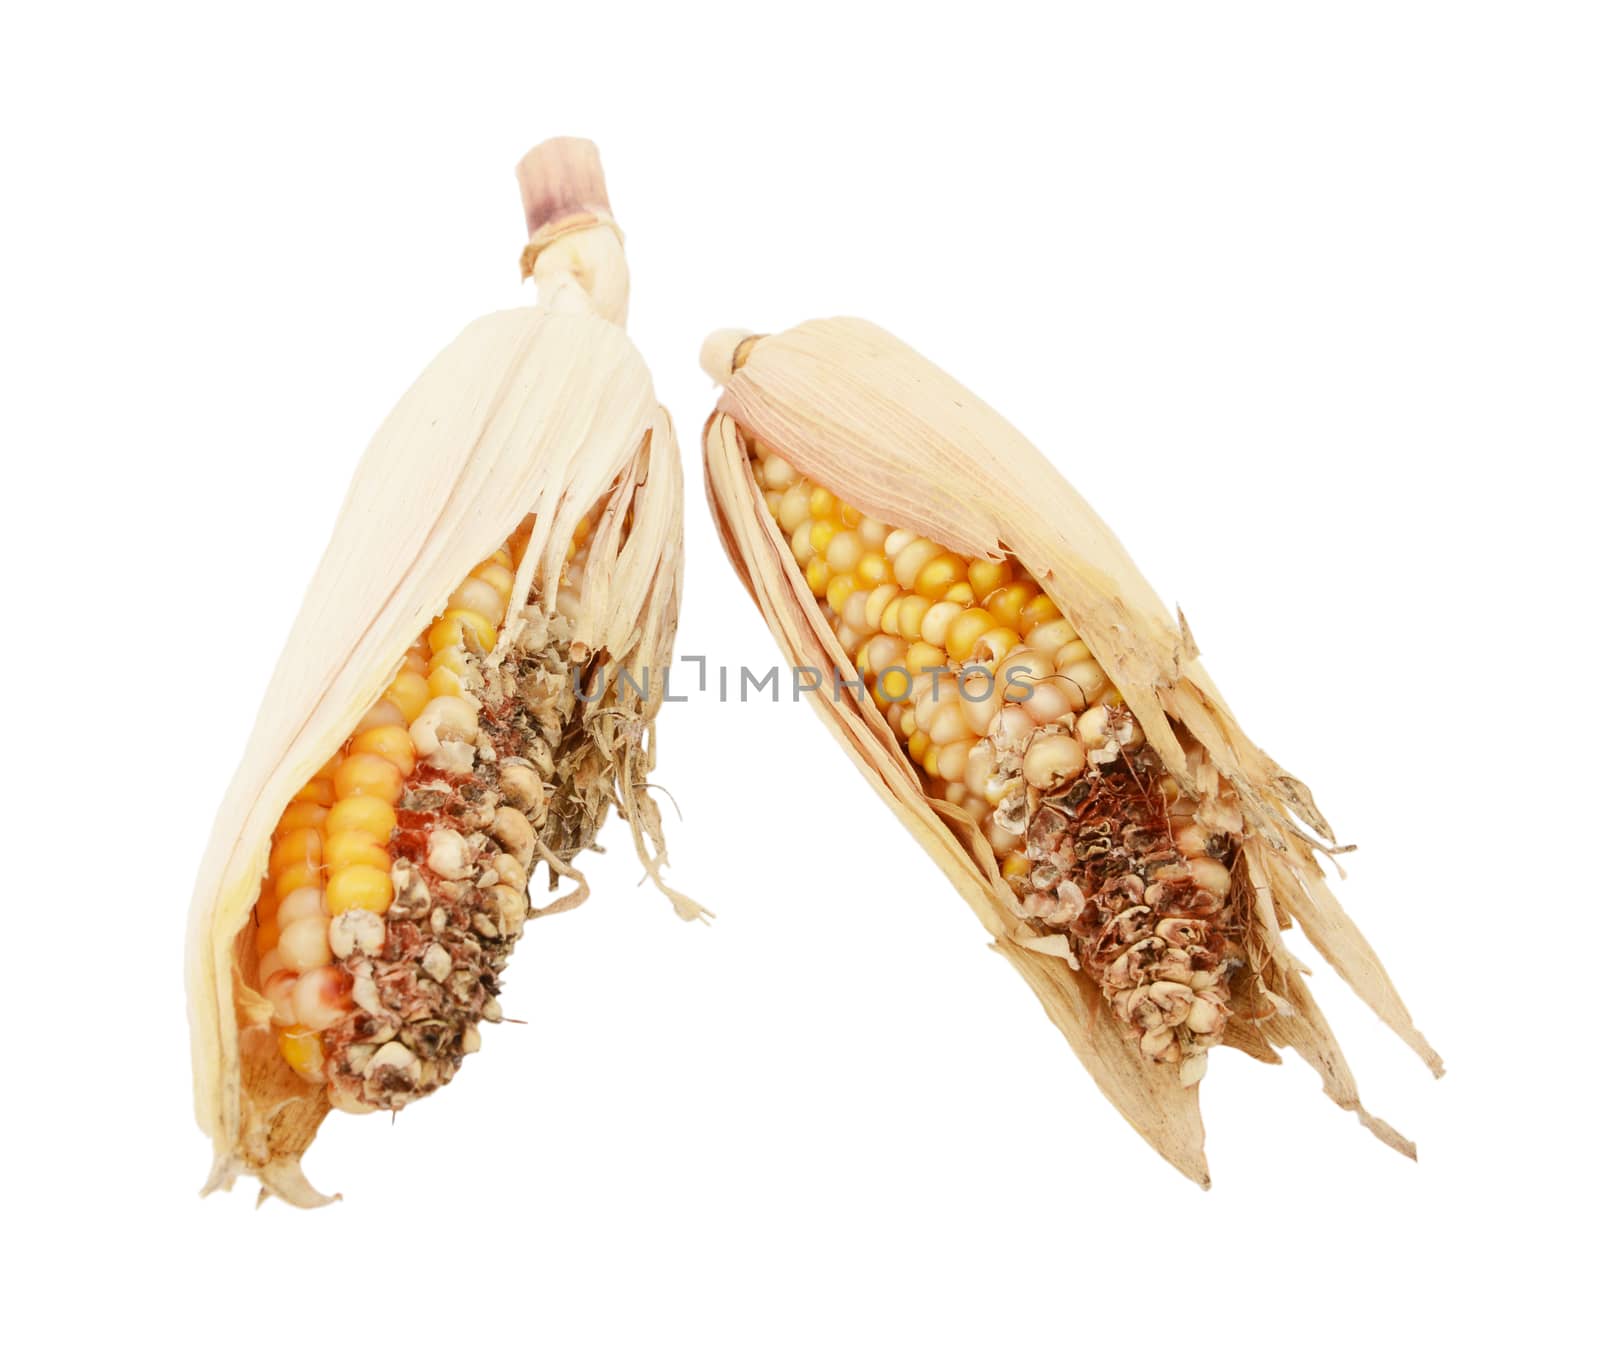 Two damaged and eaten ornamental sweetcorn cobs with ripped, dry husks and missing niblets, on a white background